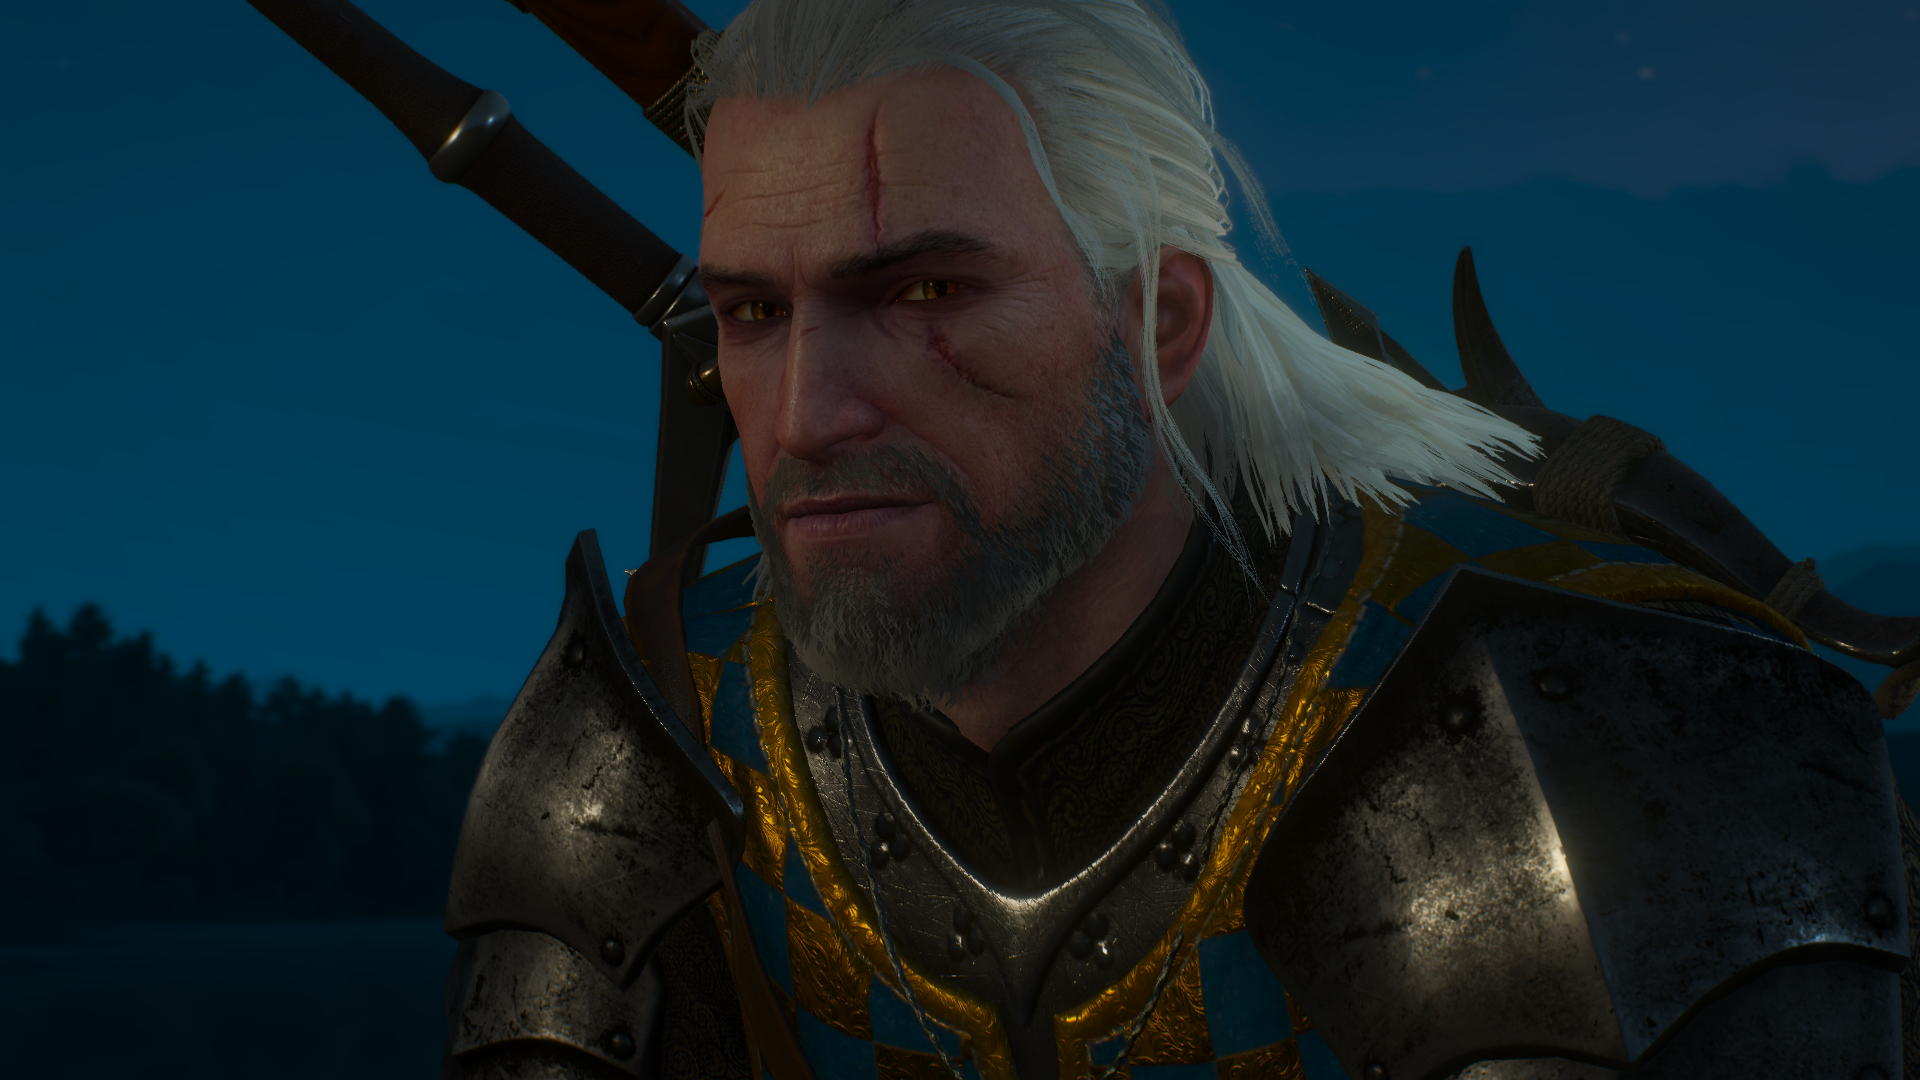 General 1920x1080 The Witcher 3: Wild Hunt video games CD Projekt RED Geralt of Rivia looking at viewer The Witcher The Witcher 3: Wild Hunt - Blood and Wine video game characters Book characters